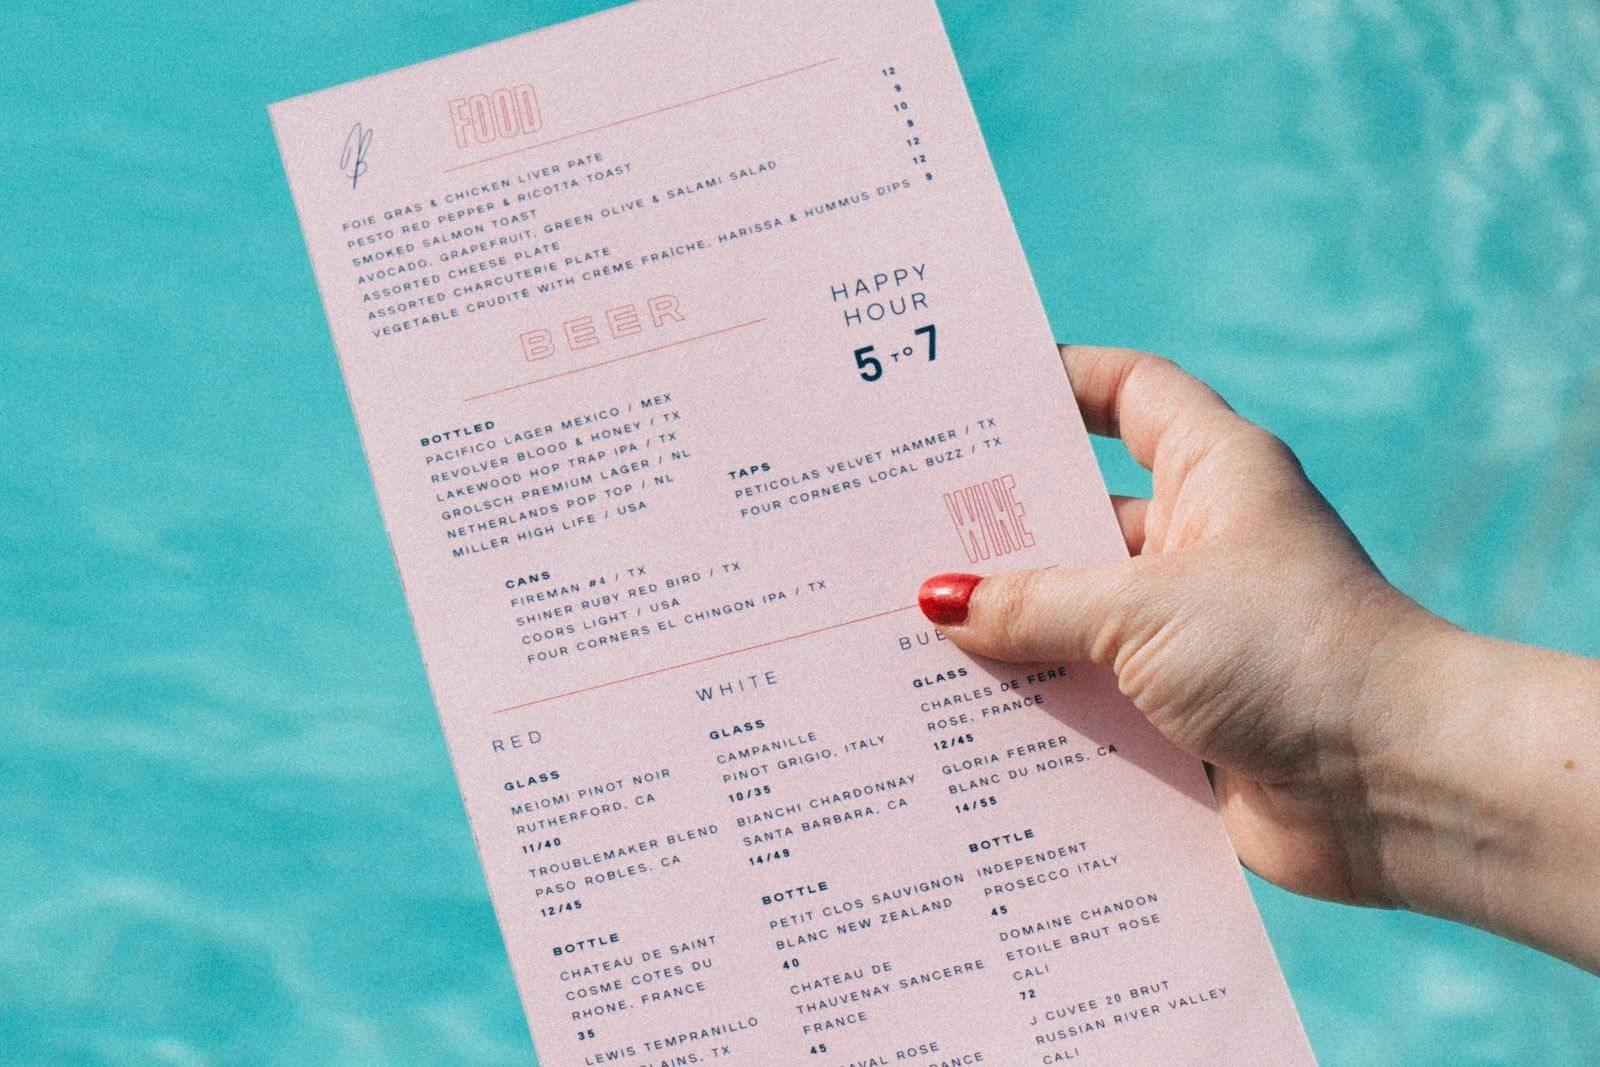 Hand holding a food and drinks menu by the pool